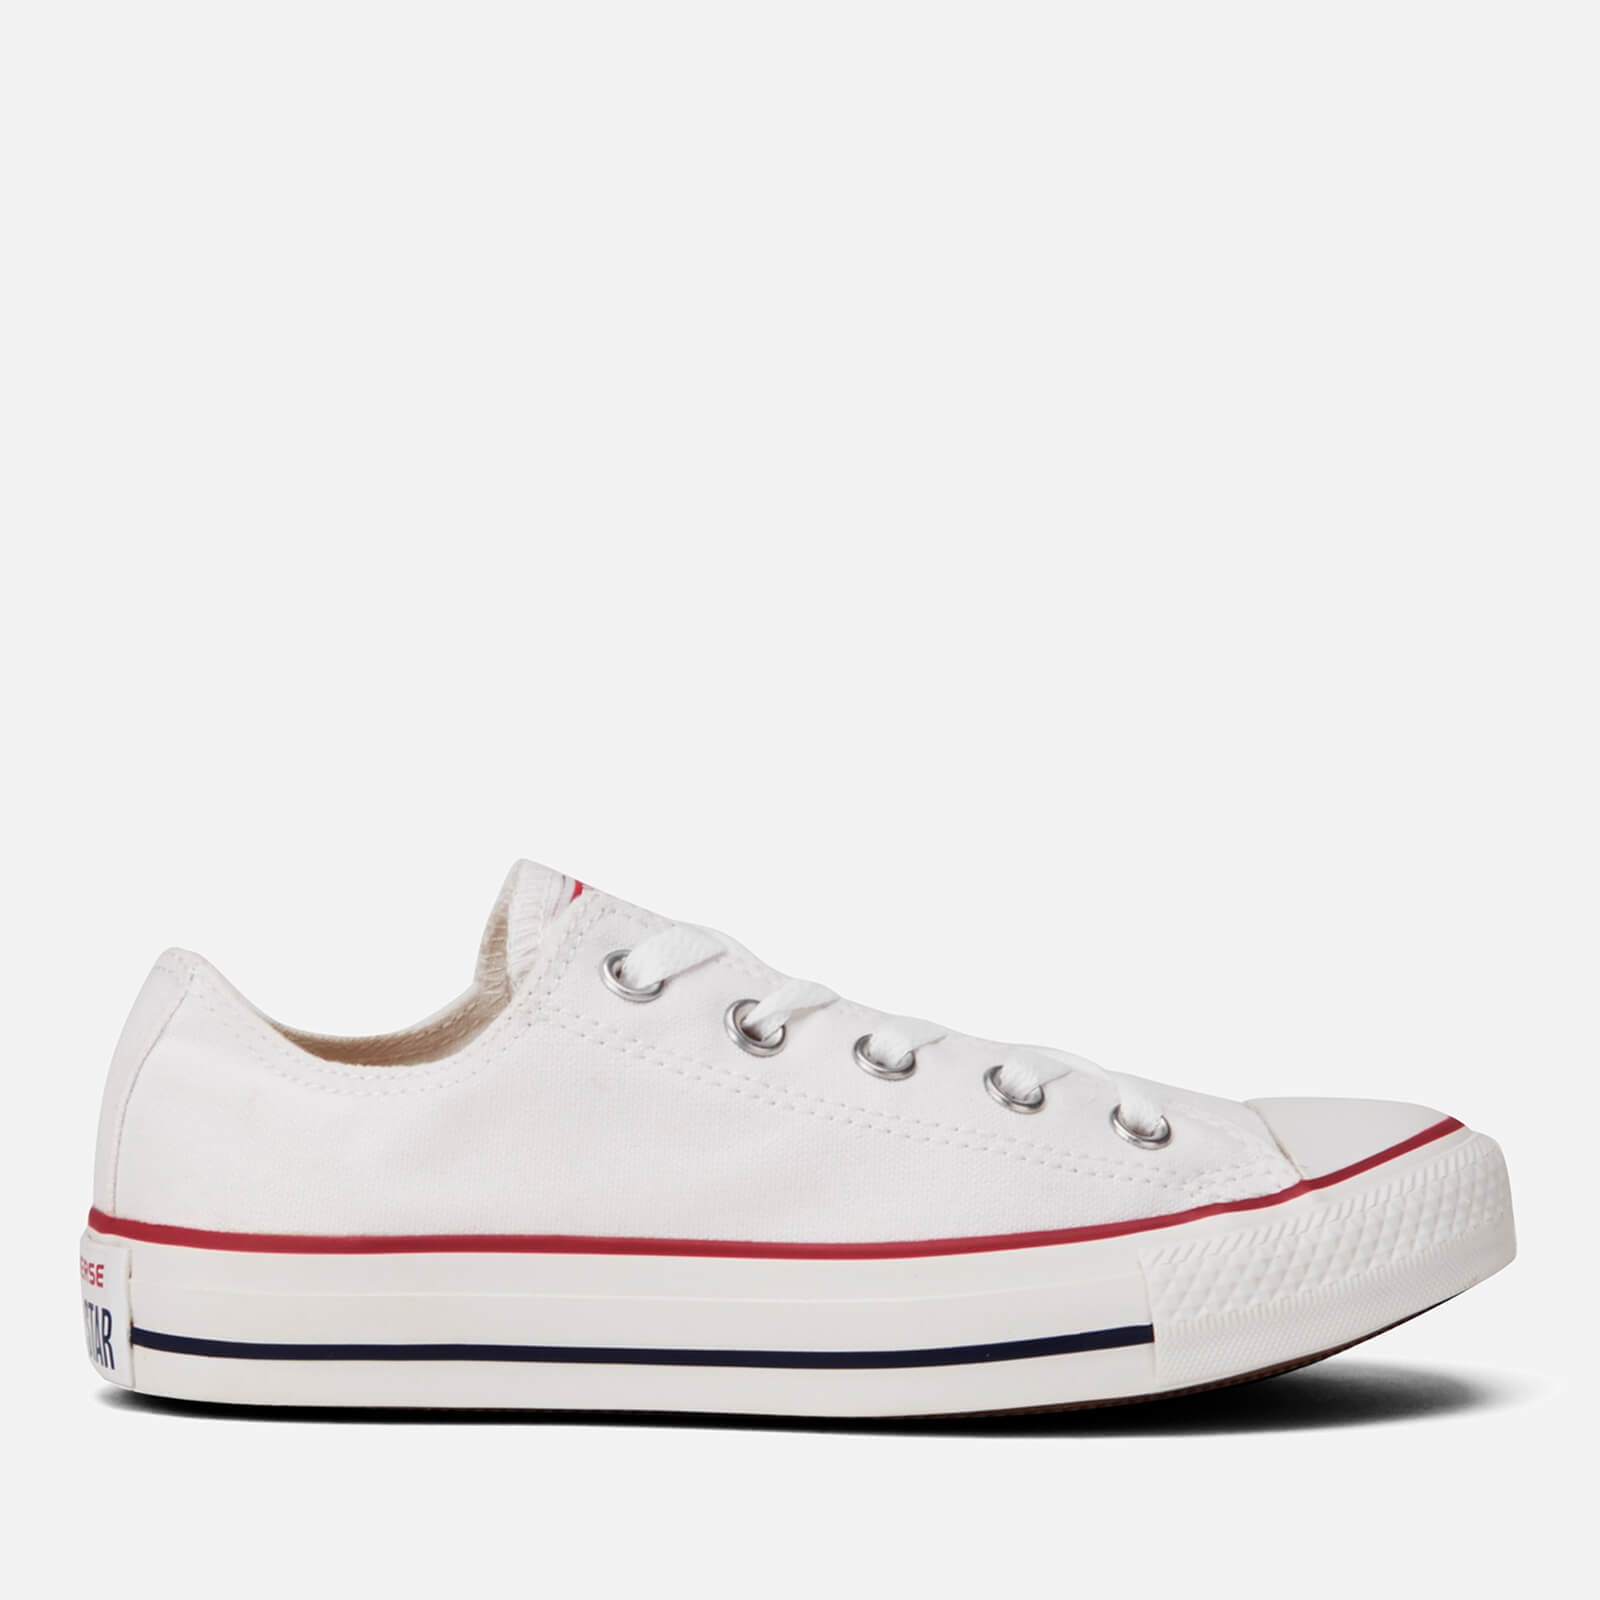 converse chuck taylor all star ox white trainers